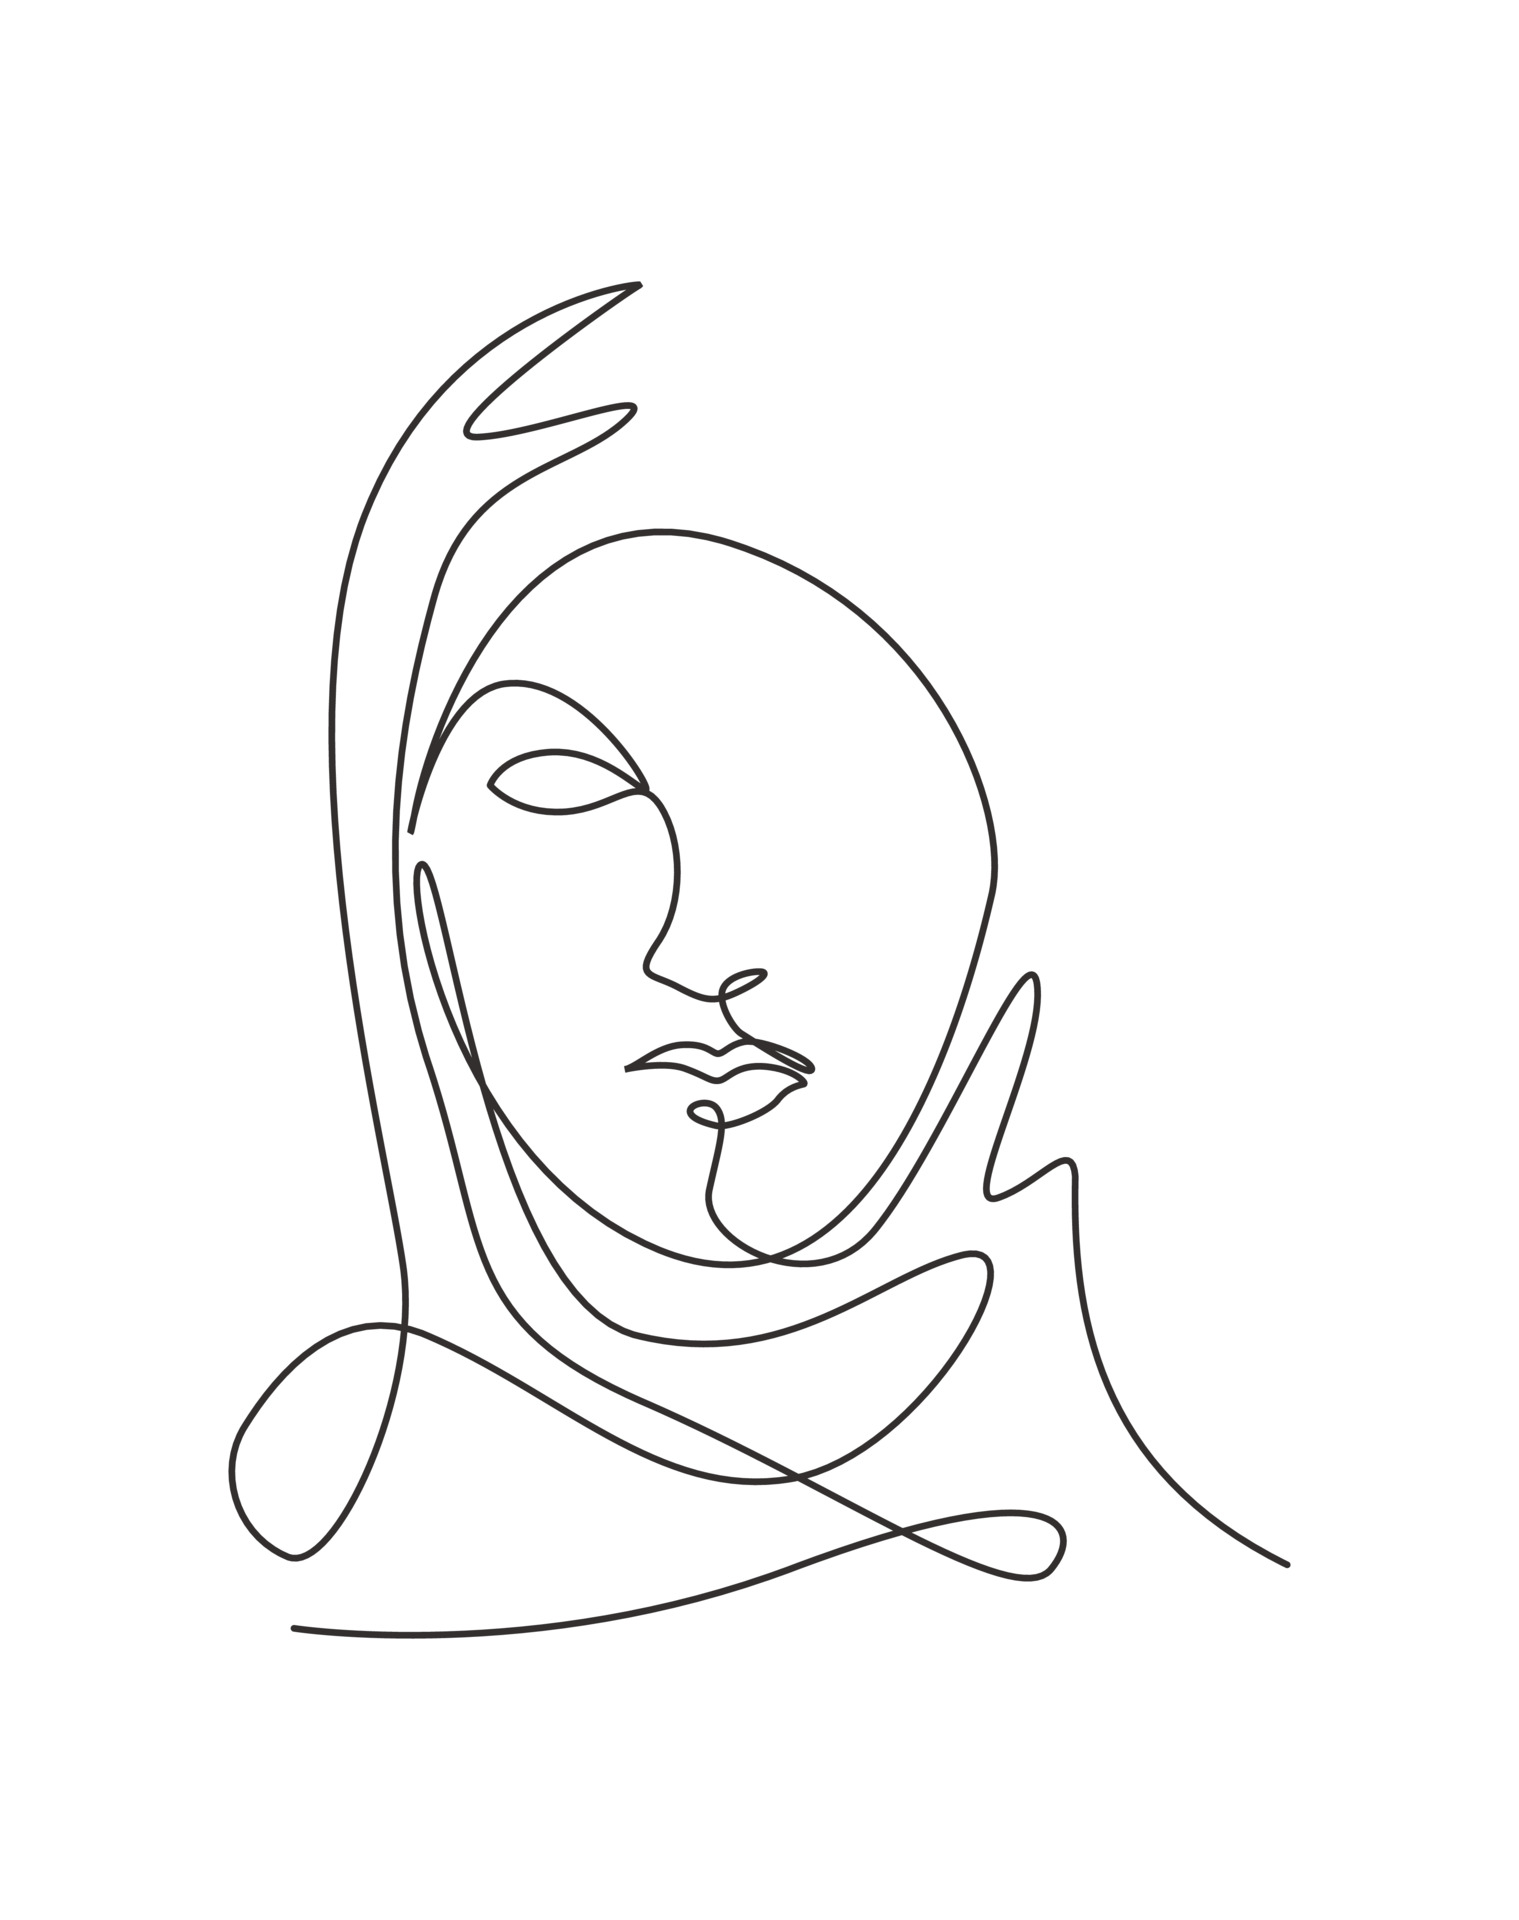 Single continuous line drawing beautiful aesthetic portrait woman abstract face. Pretty female silhouette in hijab minimalist style concept. Trendy one line draw design vector graphic illustration